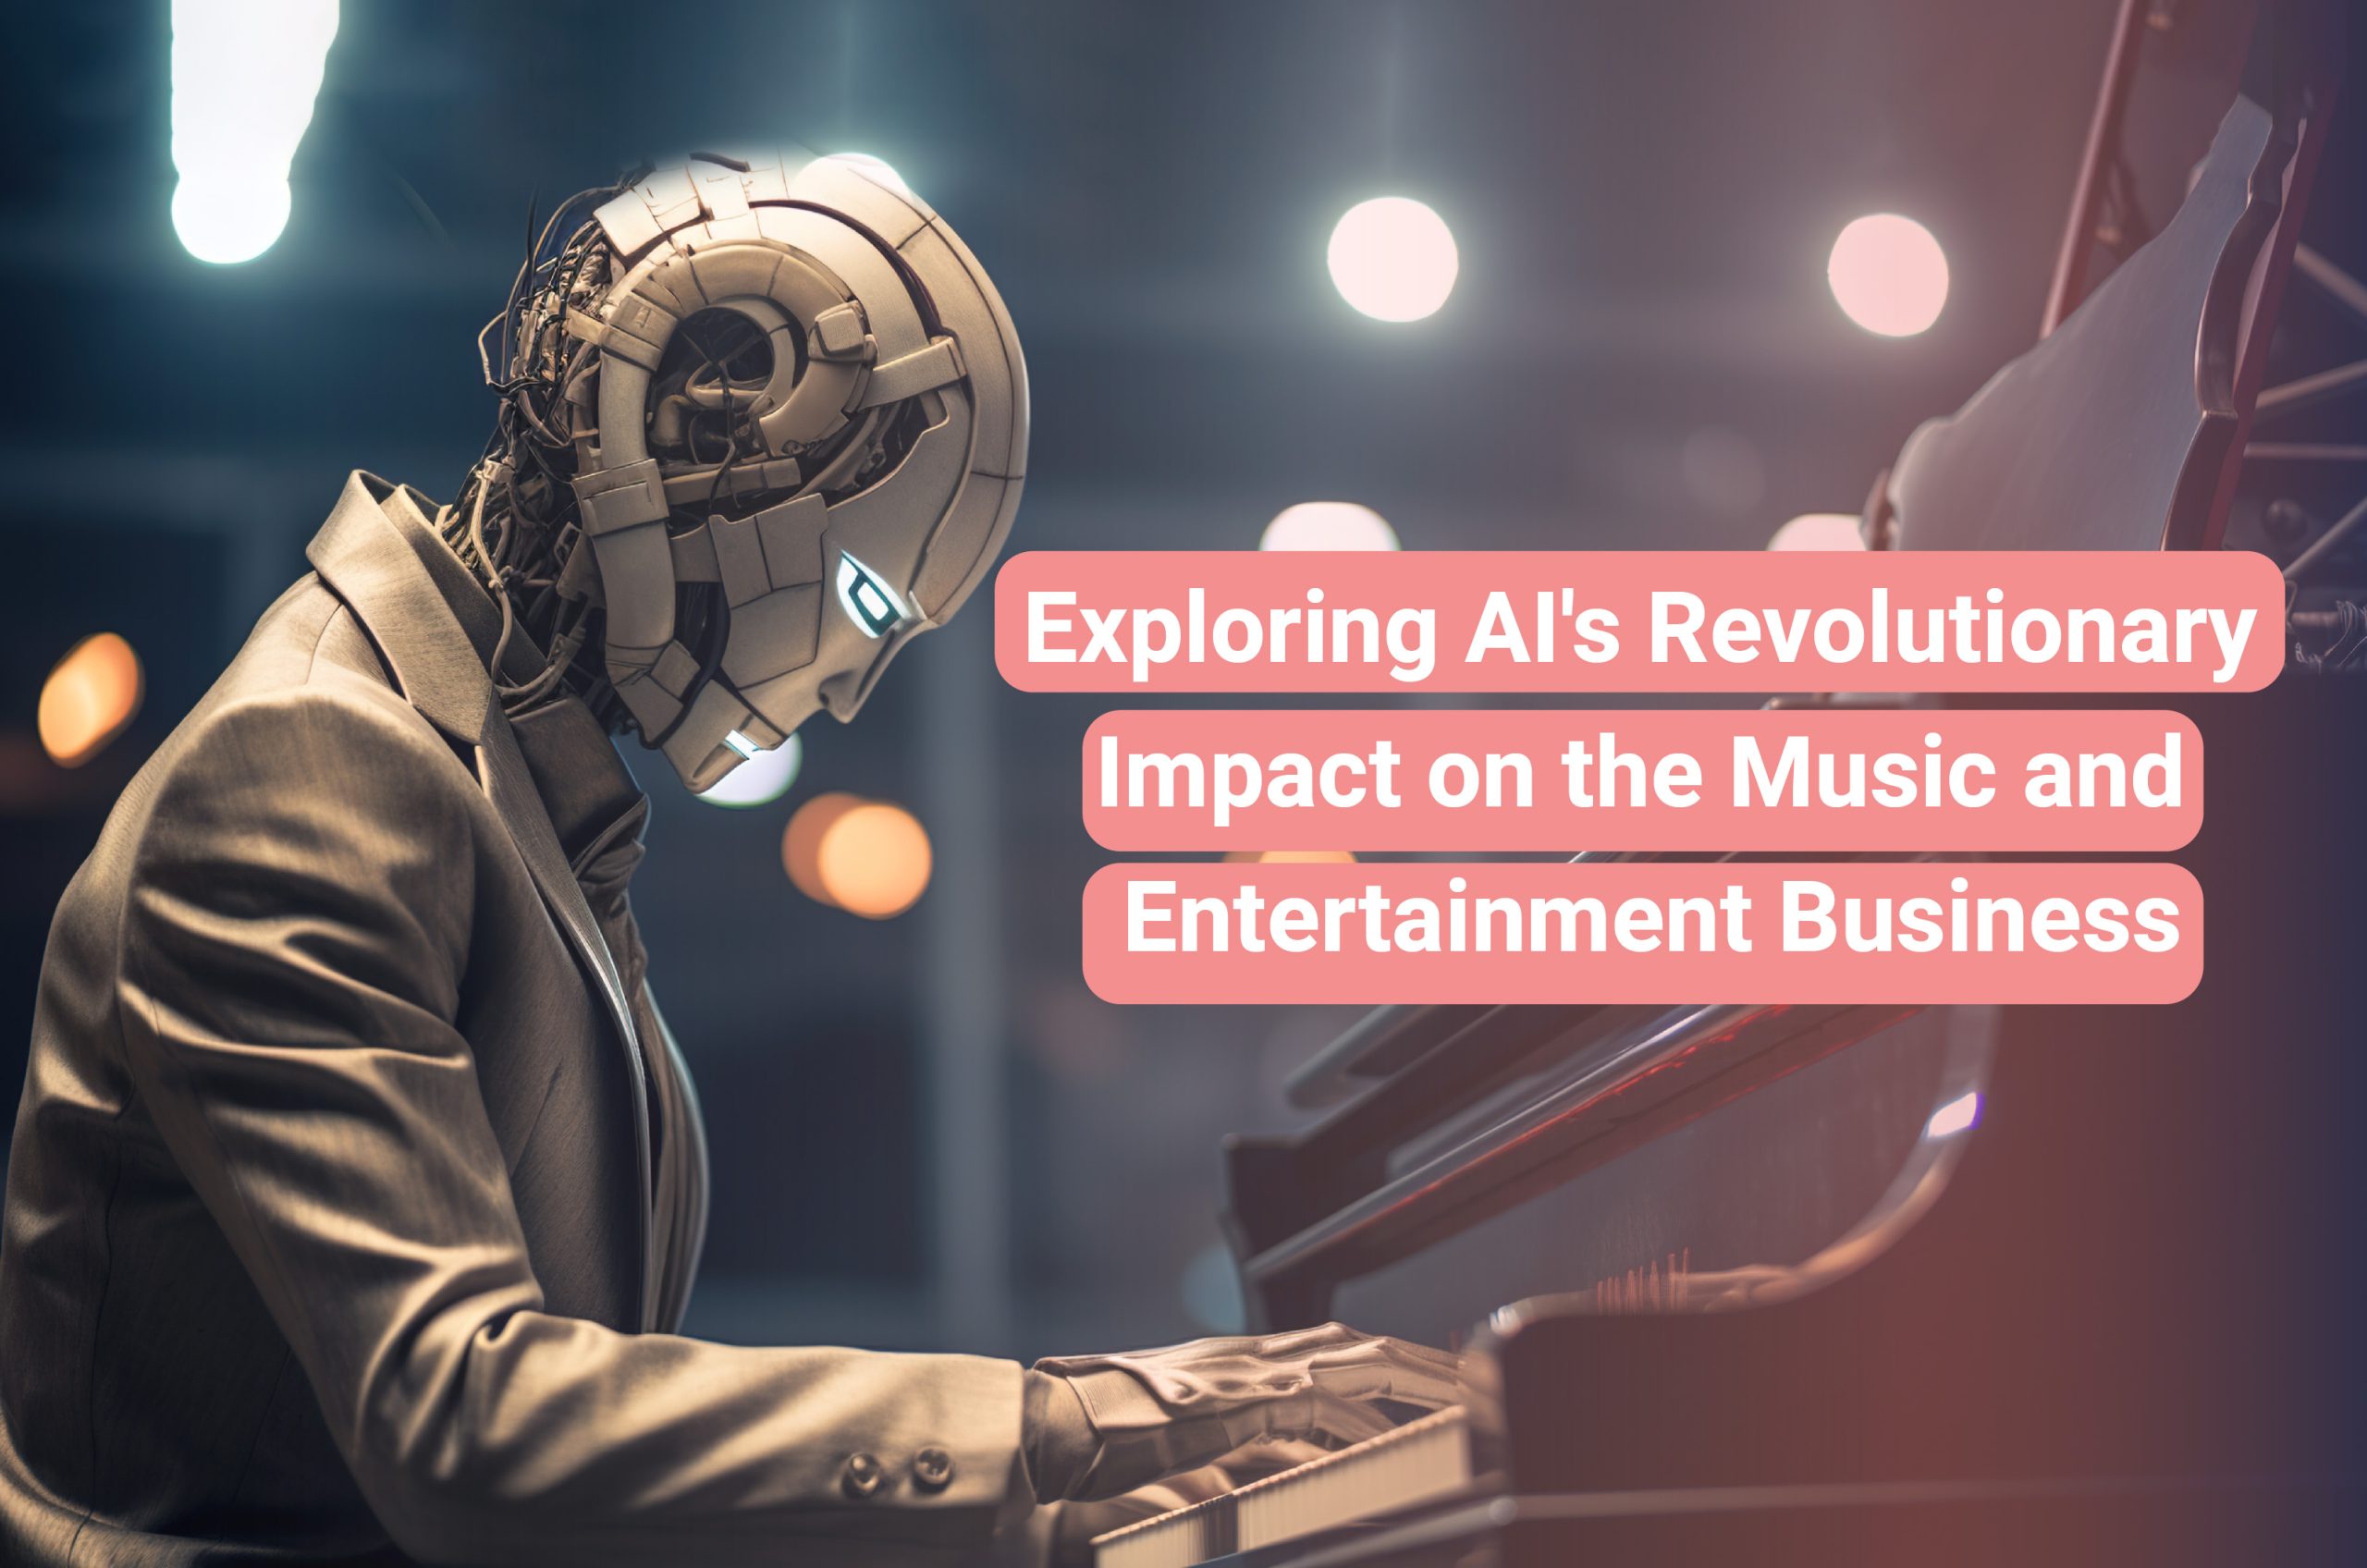 Exploring AI’s Revolutionary Impact on the Music and Entertainment Business